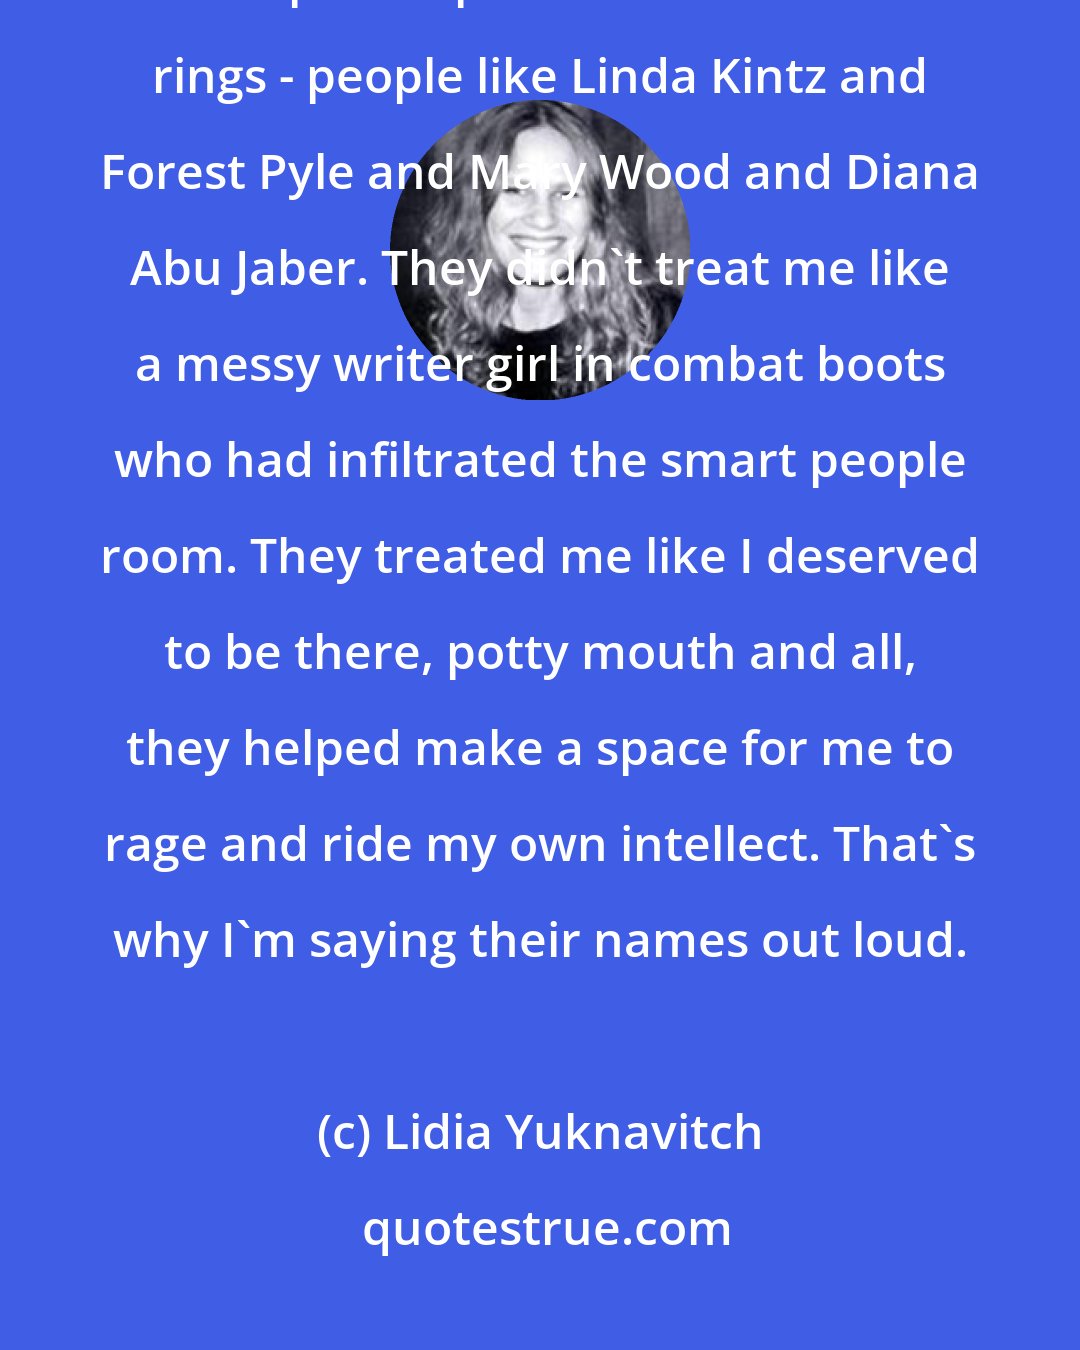 Lidia Yuknavitch: Too, some of my teachers helped me to navigate those books, showed me the maps and paths and secret decoder rings - people like Linda Kintz and Forest Pyle and Mary Wood and Diana Abu Jaber. They didn't treat me like a messy writer girl in combat boots who had infiltrated the smart people room. They treated me like I deserved to be there, potty mouth and all, they helped make a space for me to rage and ride my own intellect. That's why I'm saying their names out loud.